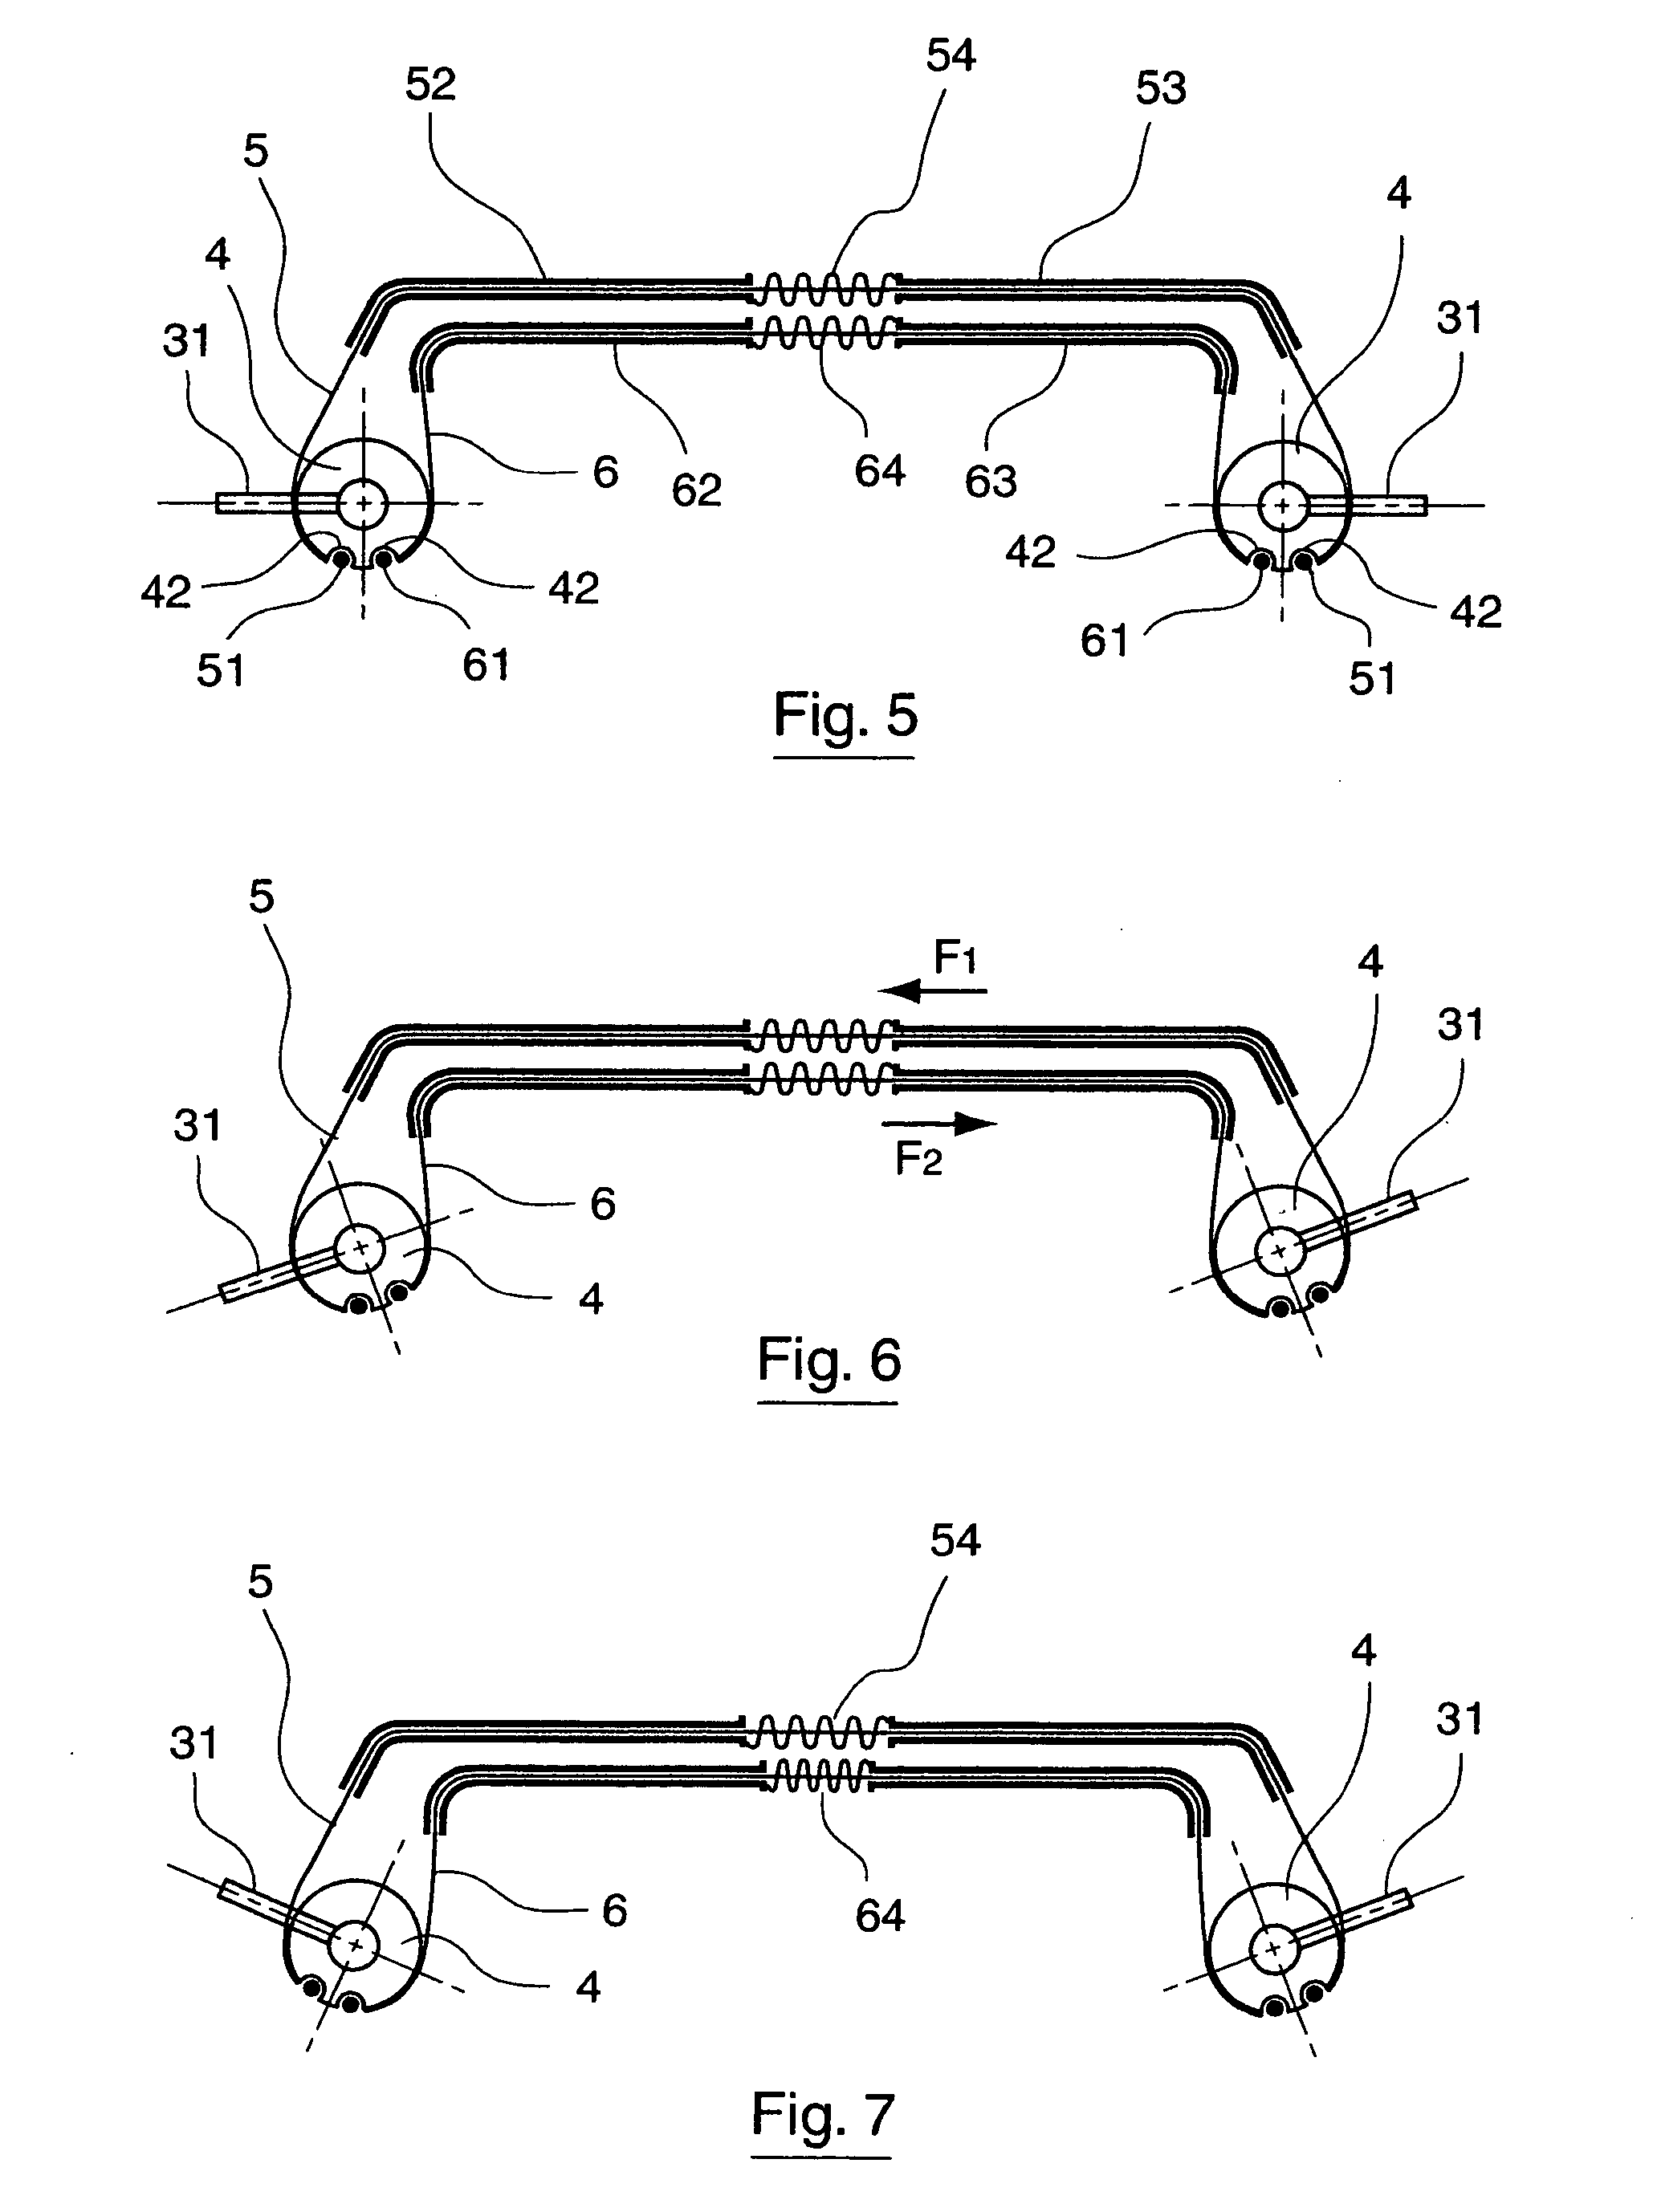 Baby carriage with directional wheels that pivot in unison by semi-rigid means